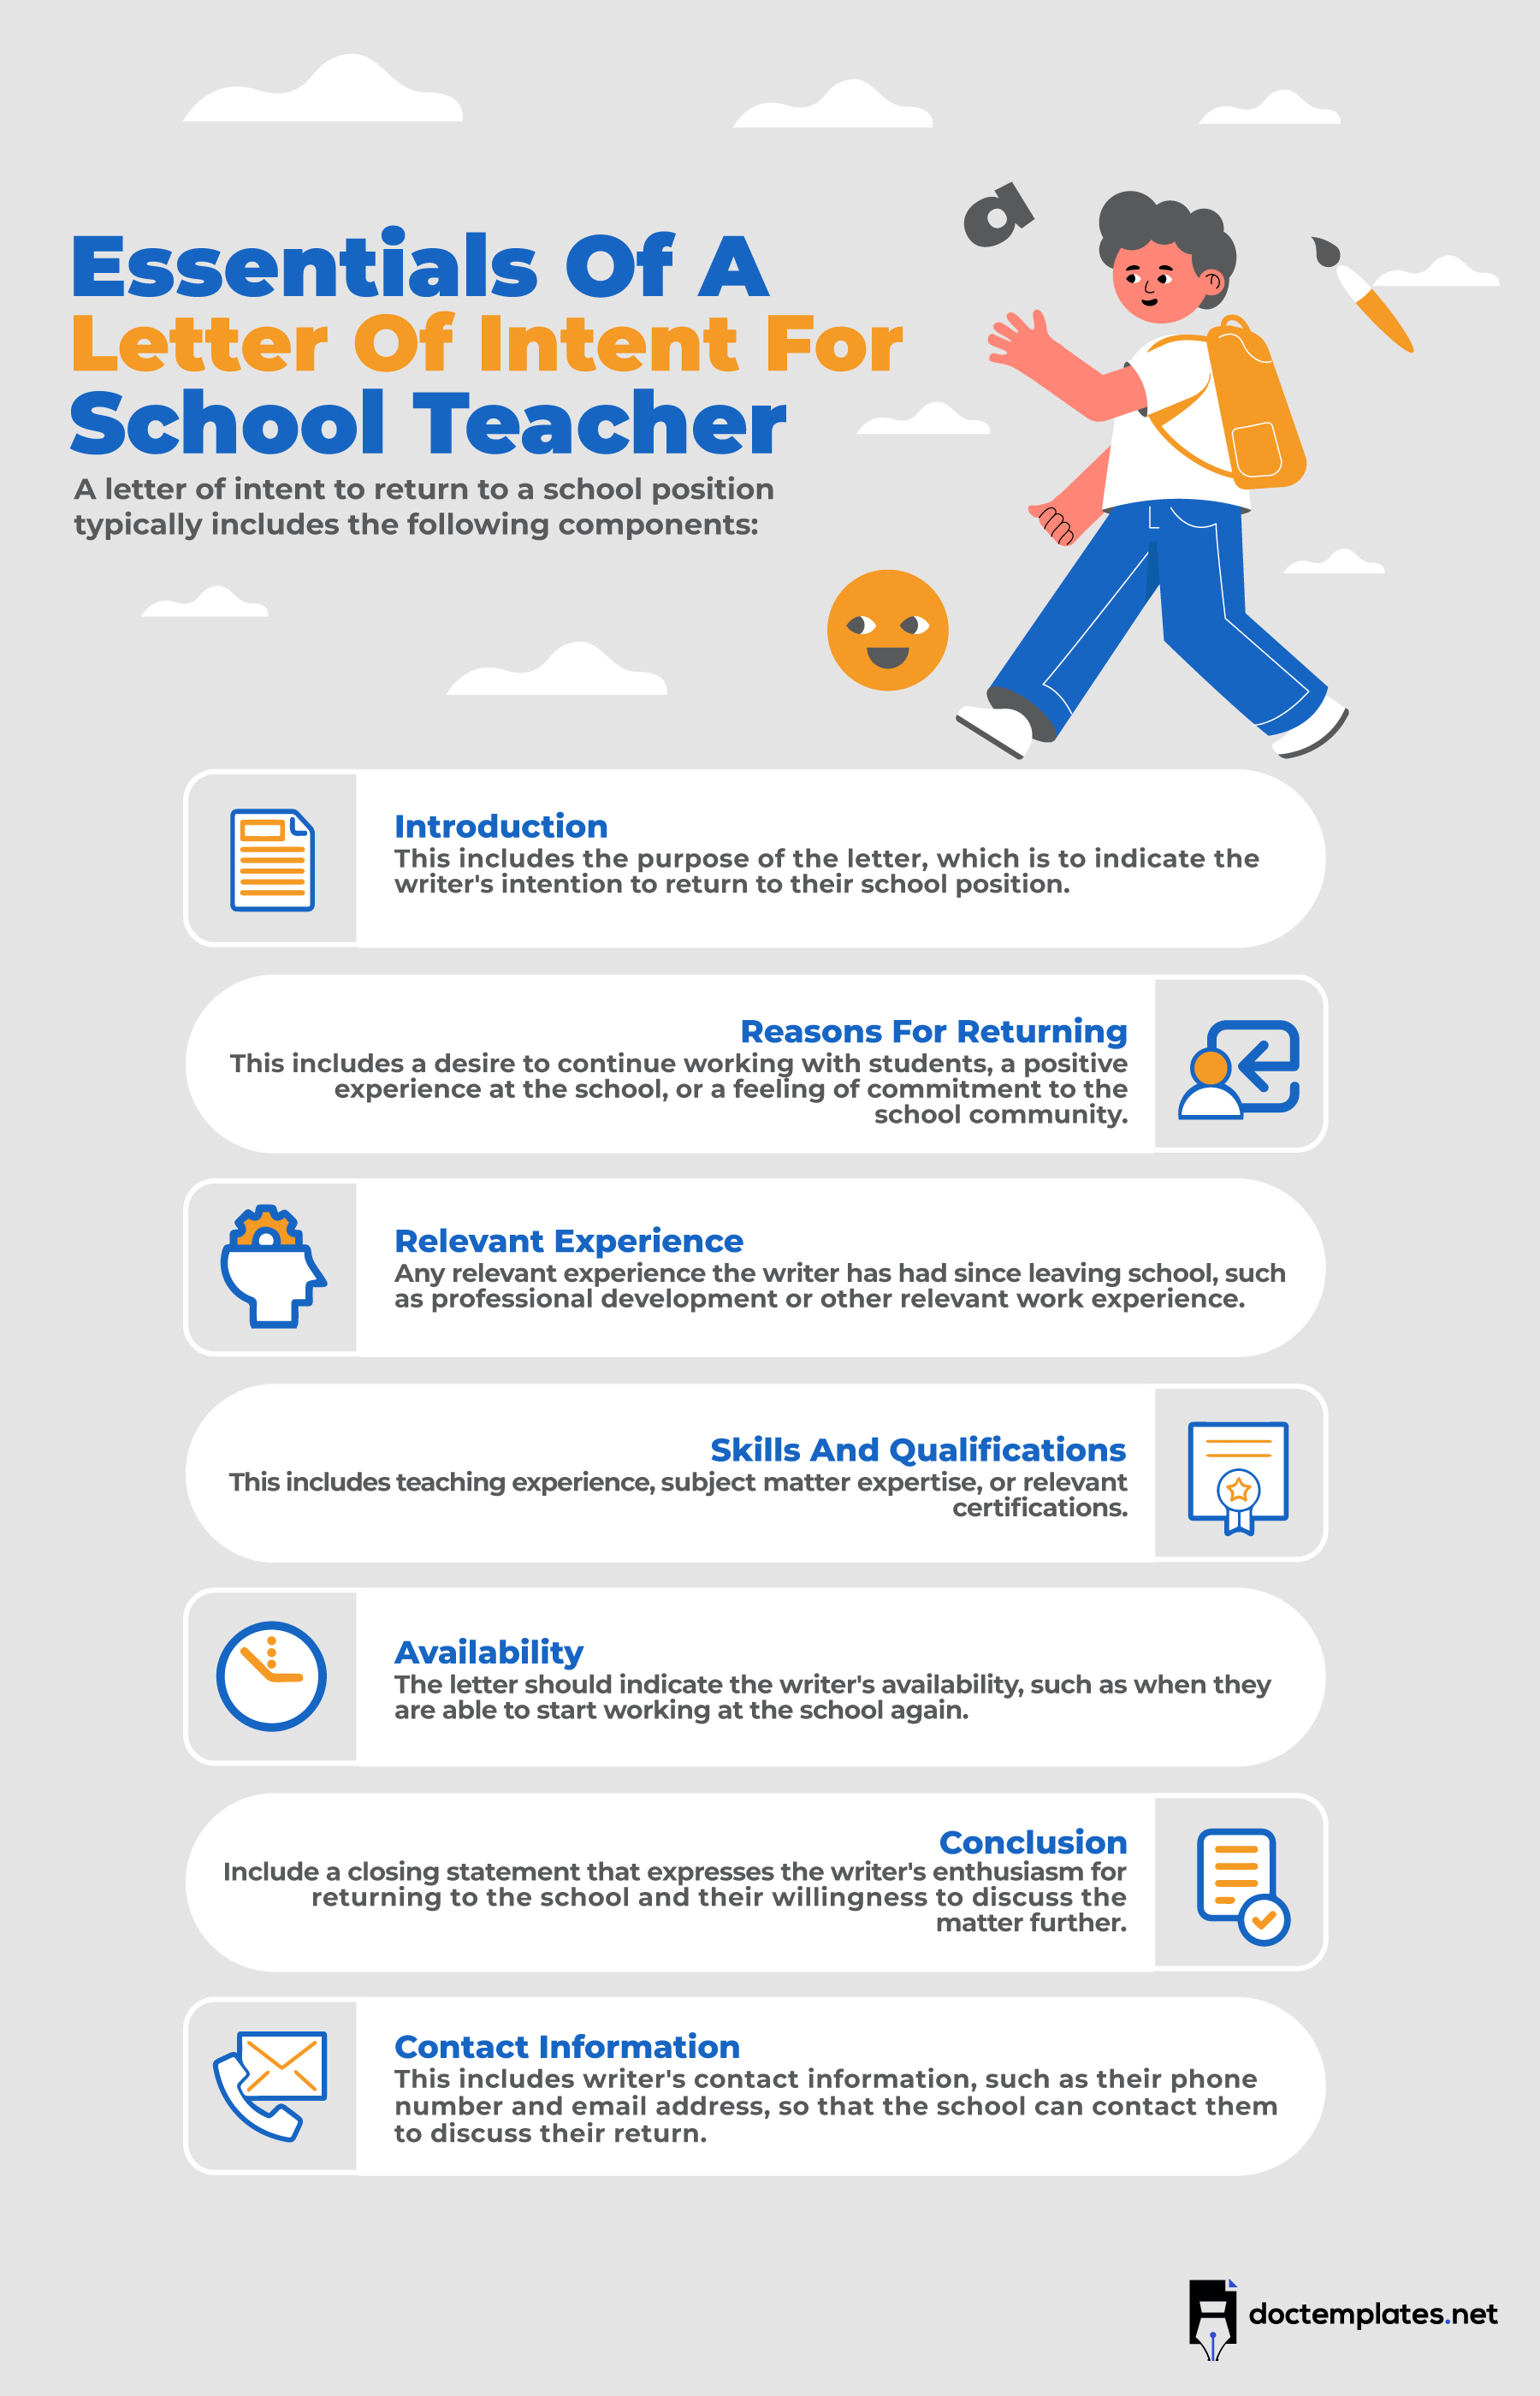 This infographic is about school teacher letter of intent components.